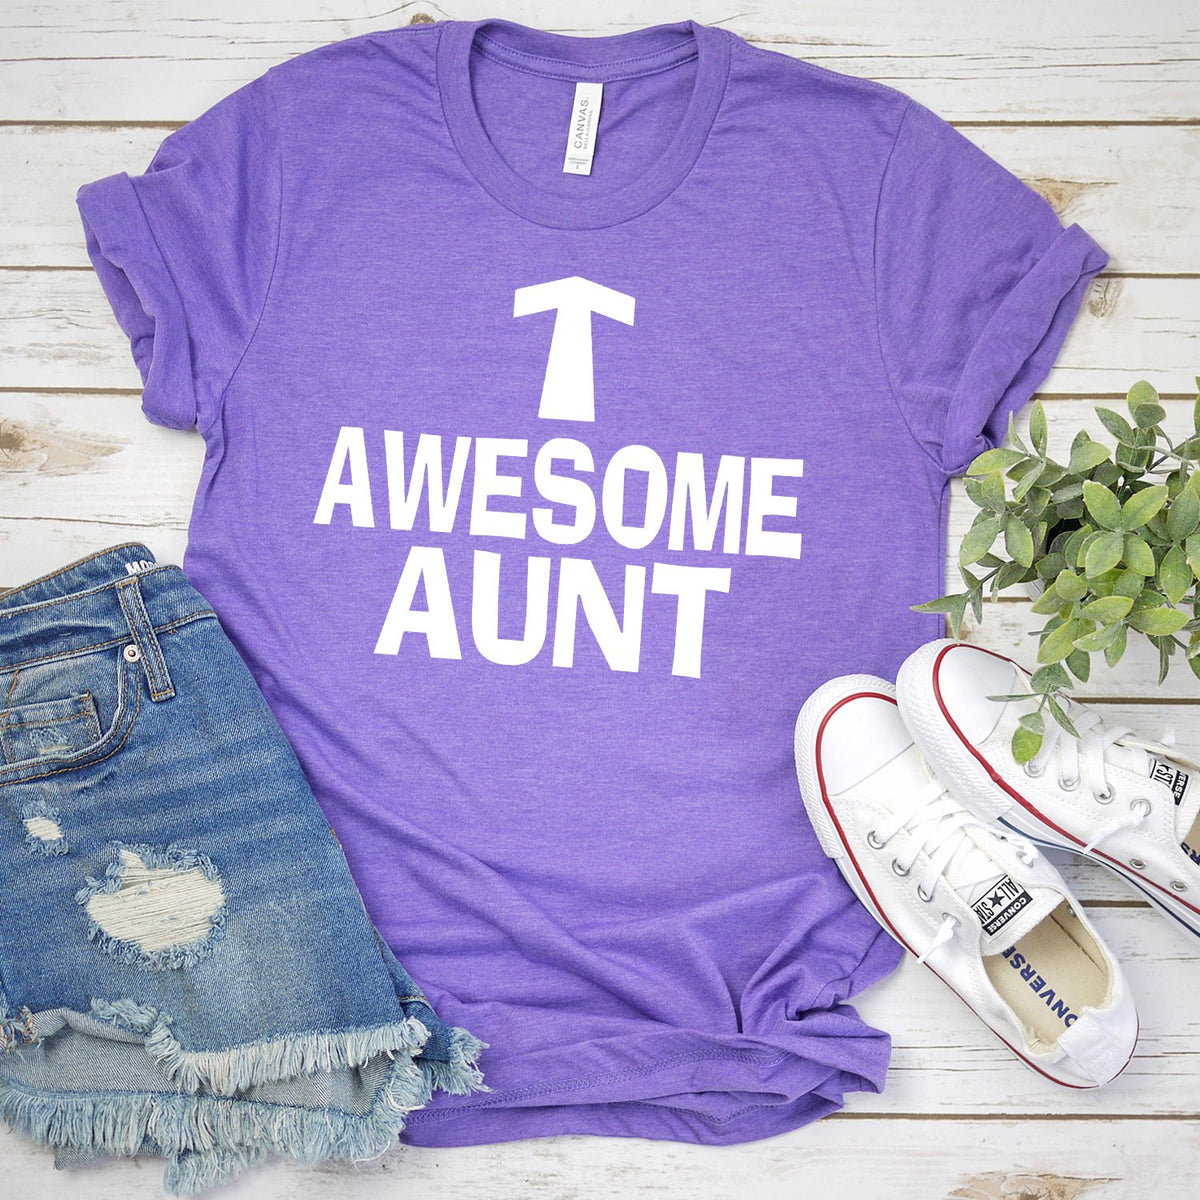 Awesome Aunt - Short Sleeve Tee Shirt